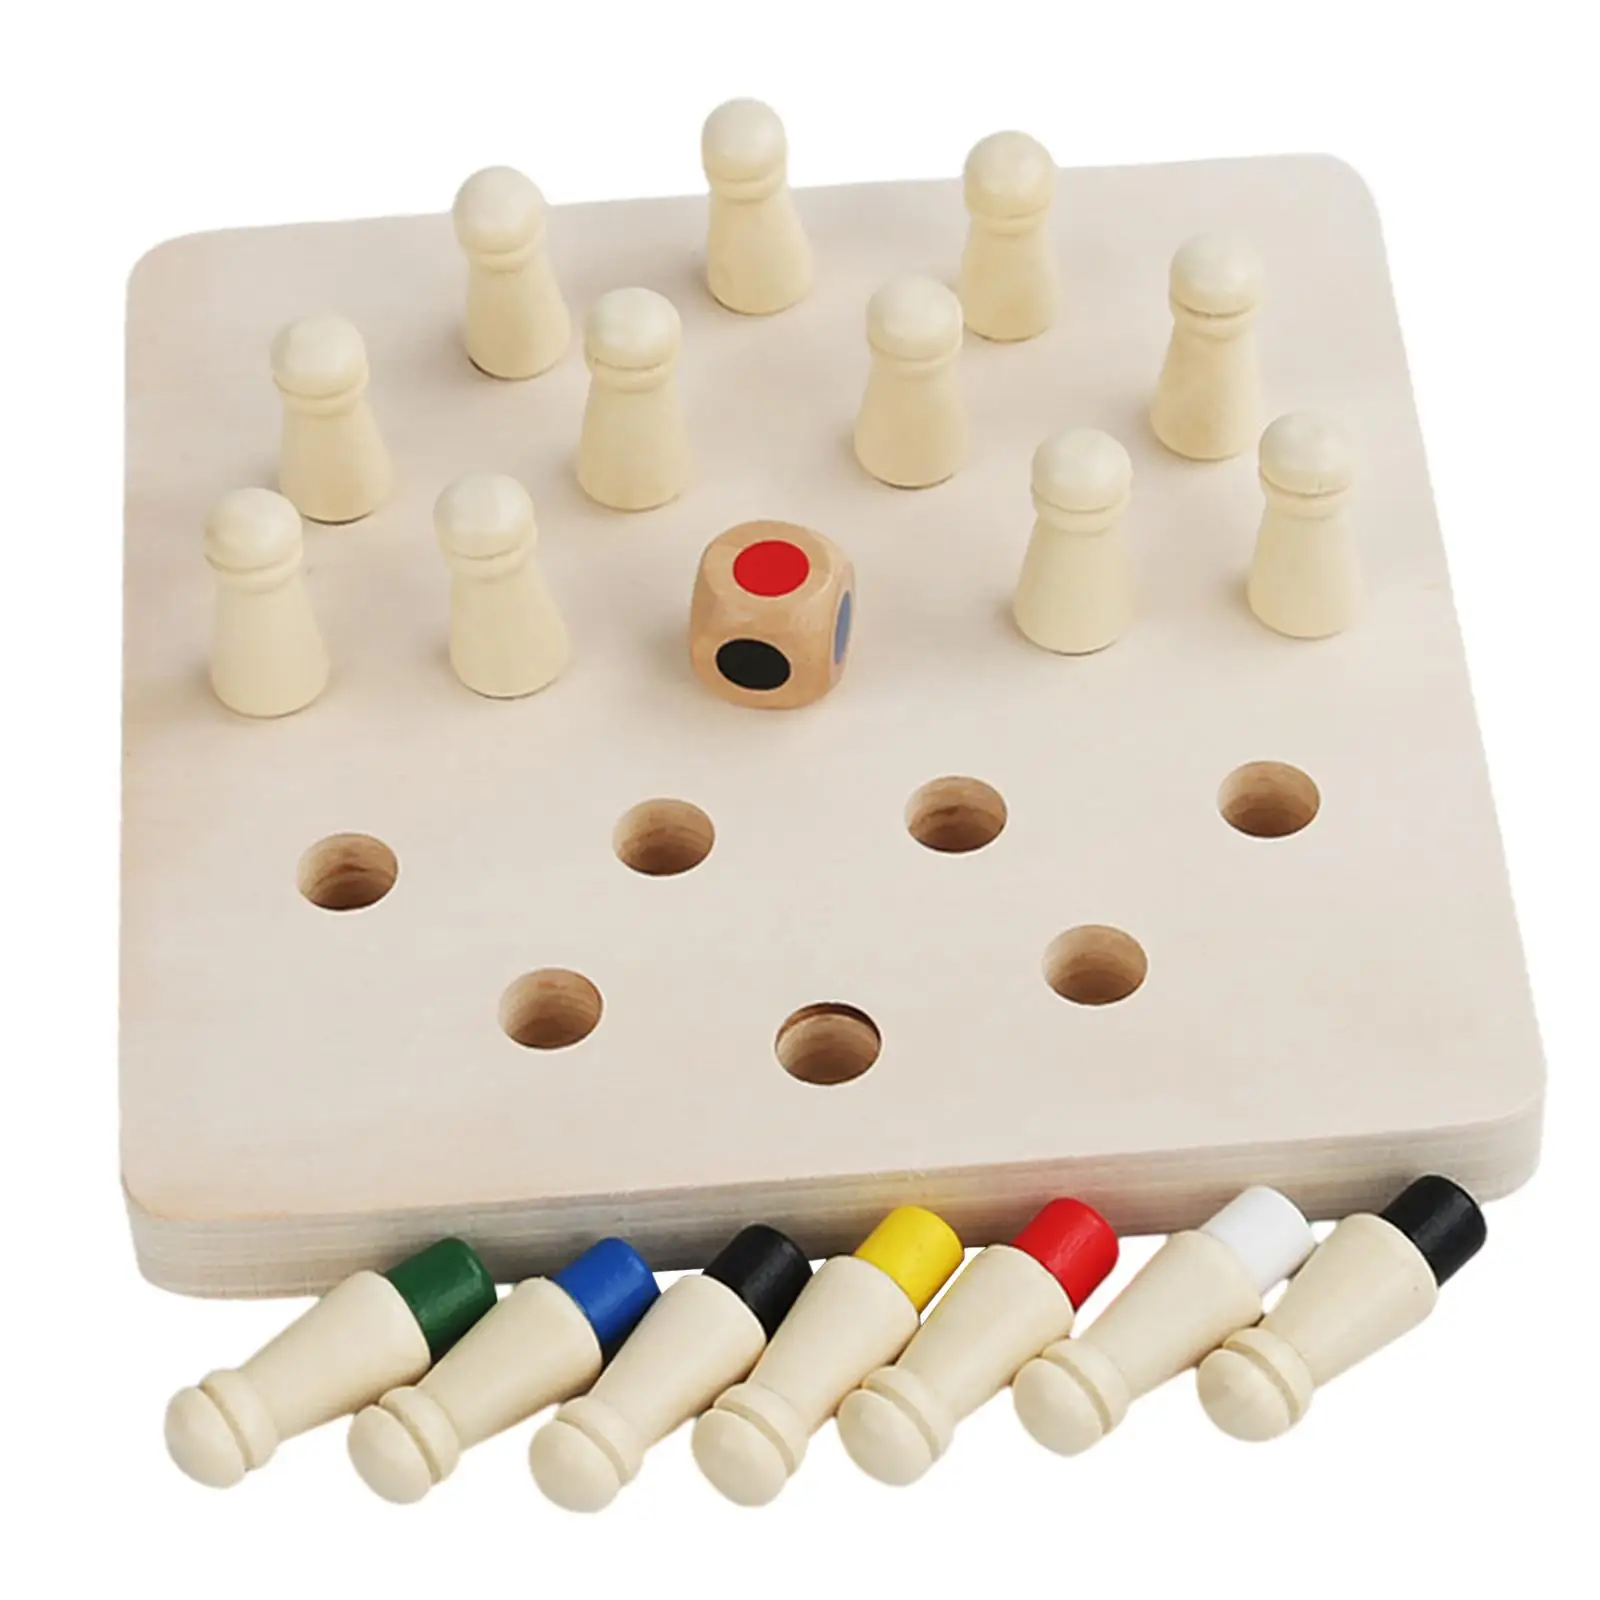 Memory Chess Toys Learning Activities Educational Toys Wooden Memory Chess Game for Children Boys Adults Toddlers Birthday Gifts